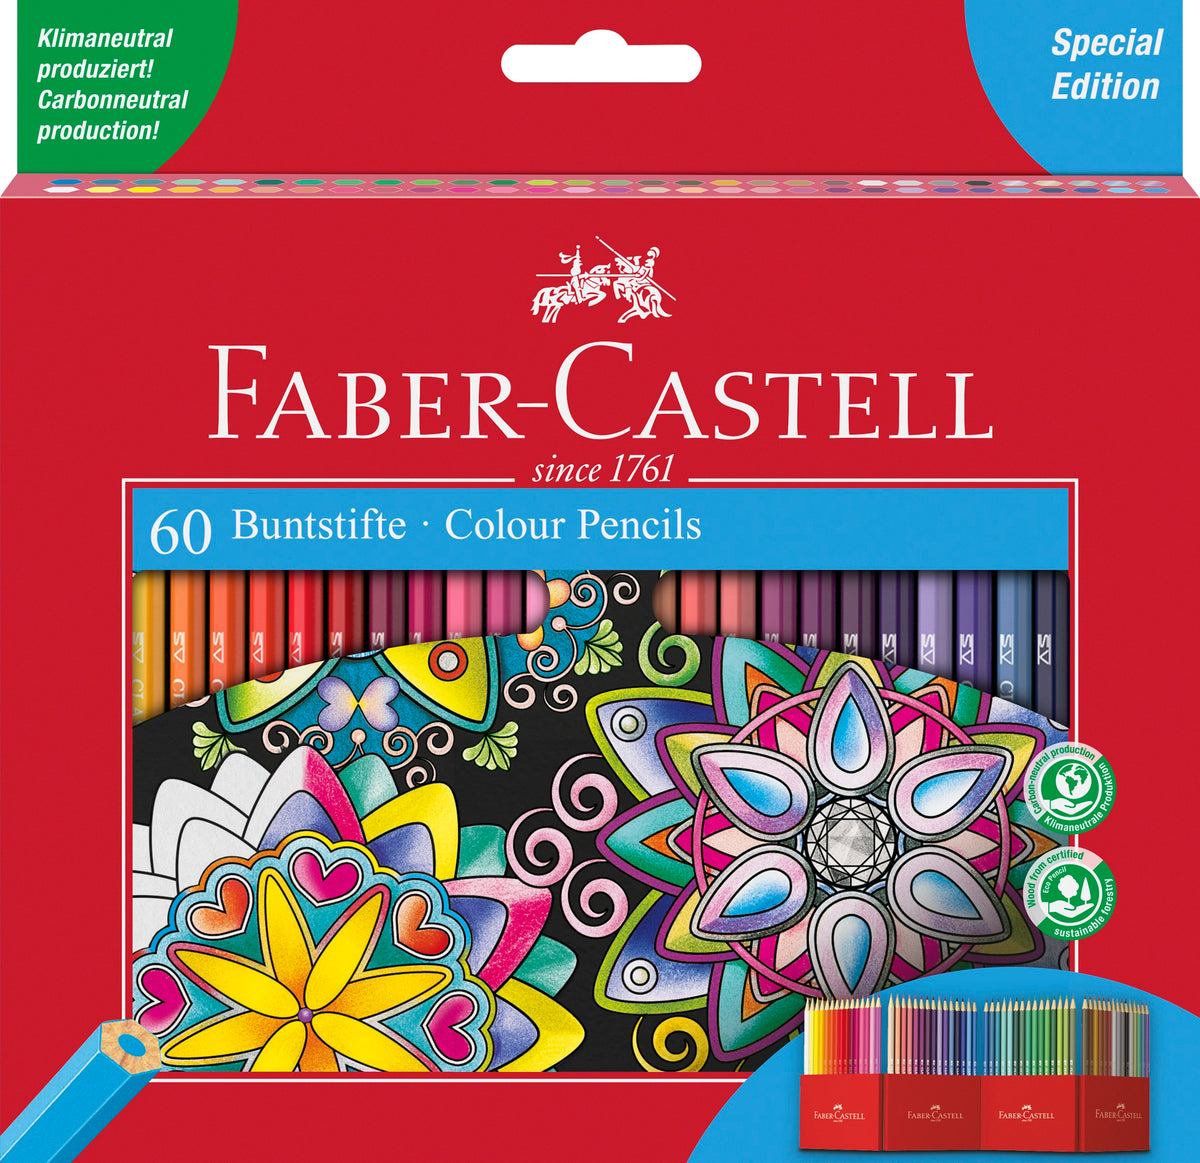 Retail packaging for 60 colouring pencils by Faber Castell. The packaging has a bright red border and shows the pencils in a cut out in the centre. There is also a decorative illustration done with the pencils and an image of how they appear once out of the box i.e. in freestanding holders.